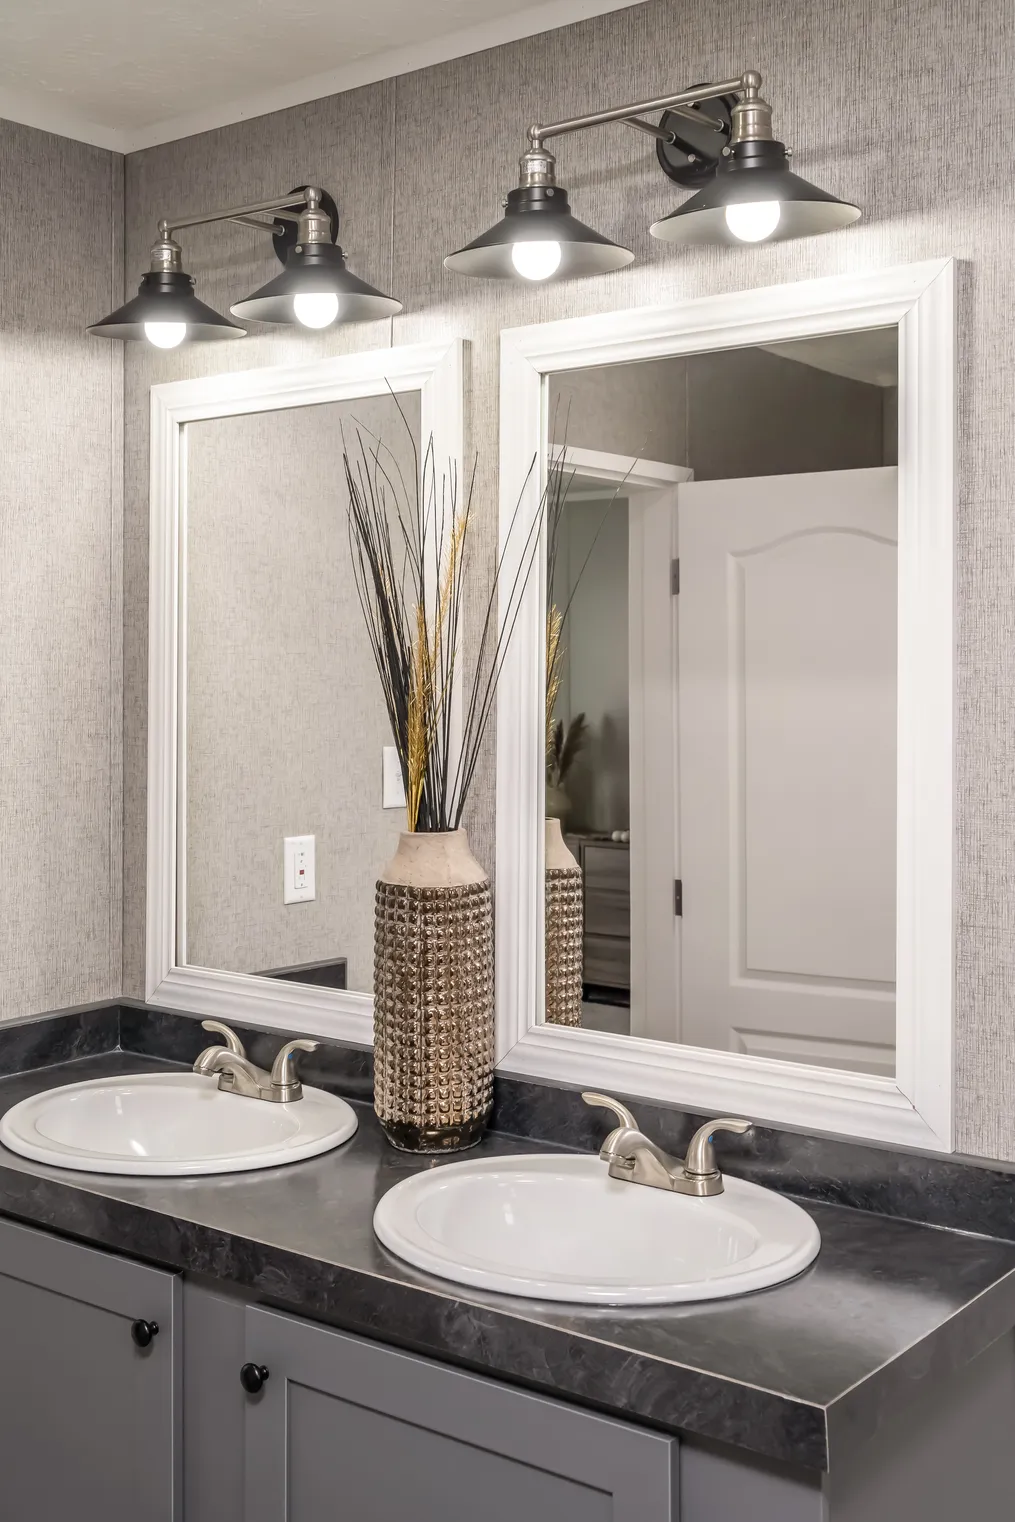 The TRADITION 60B Primary Bathroom. This Manufactured Mobile Home features 3 bedrooms and 2 baths.